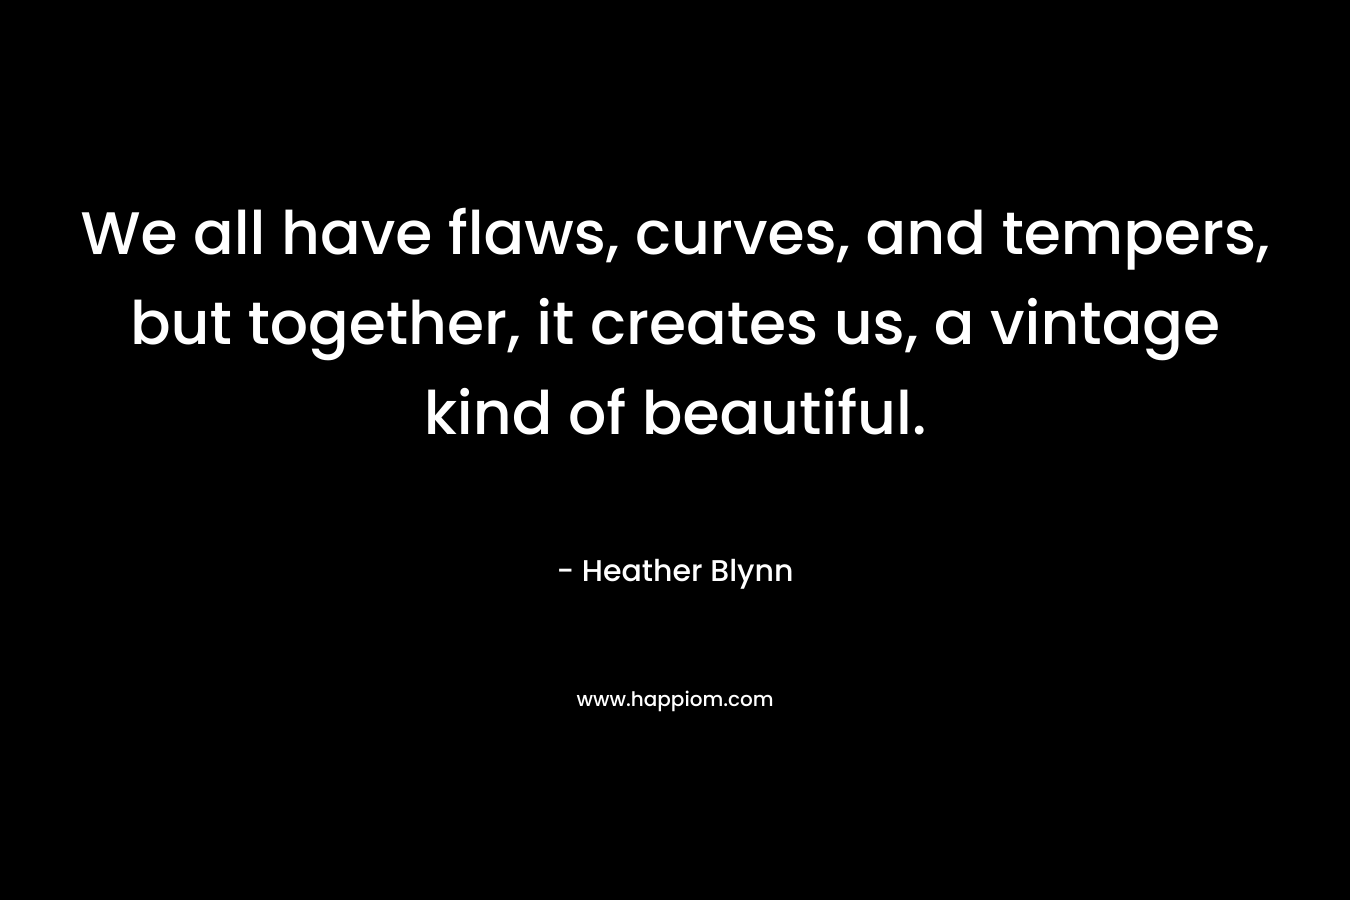 We all have flaws, curves, and tempers, but together, it creates us, a vintage kind of beautiful.